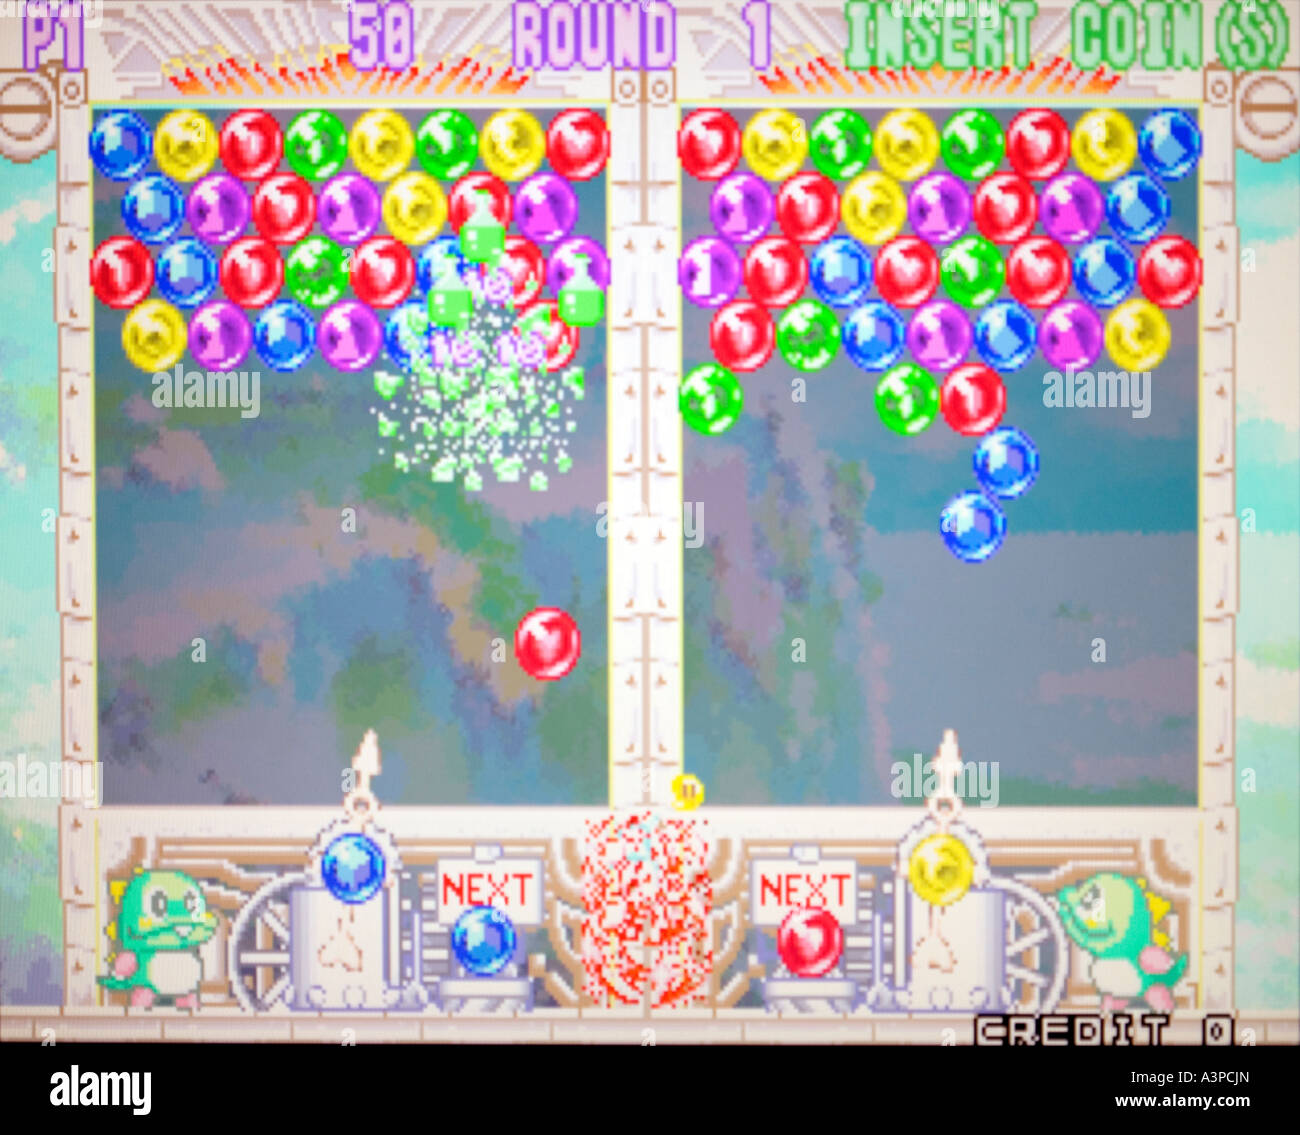 Puzzle Bobble 3 Taito Corp 1996 vintage arcade videogame screenshot  EDITORIAL USE ONLY Stock Photo - Alamy